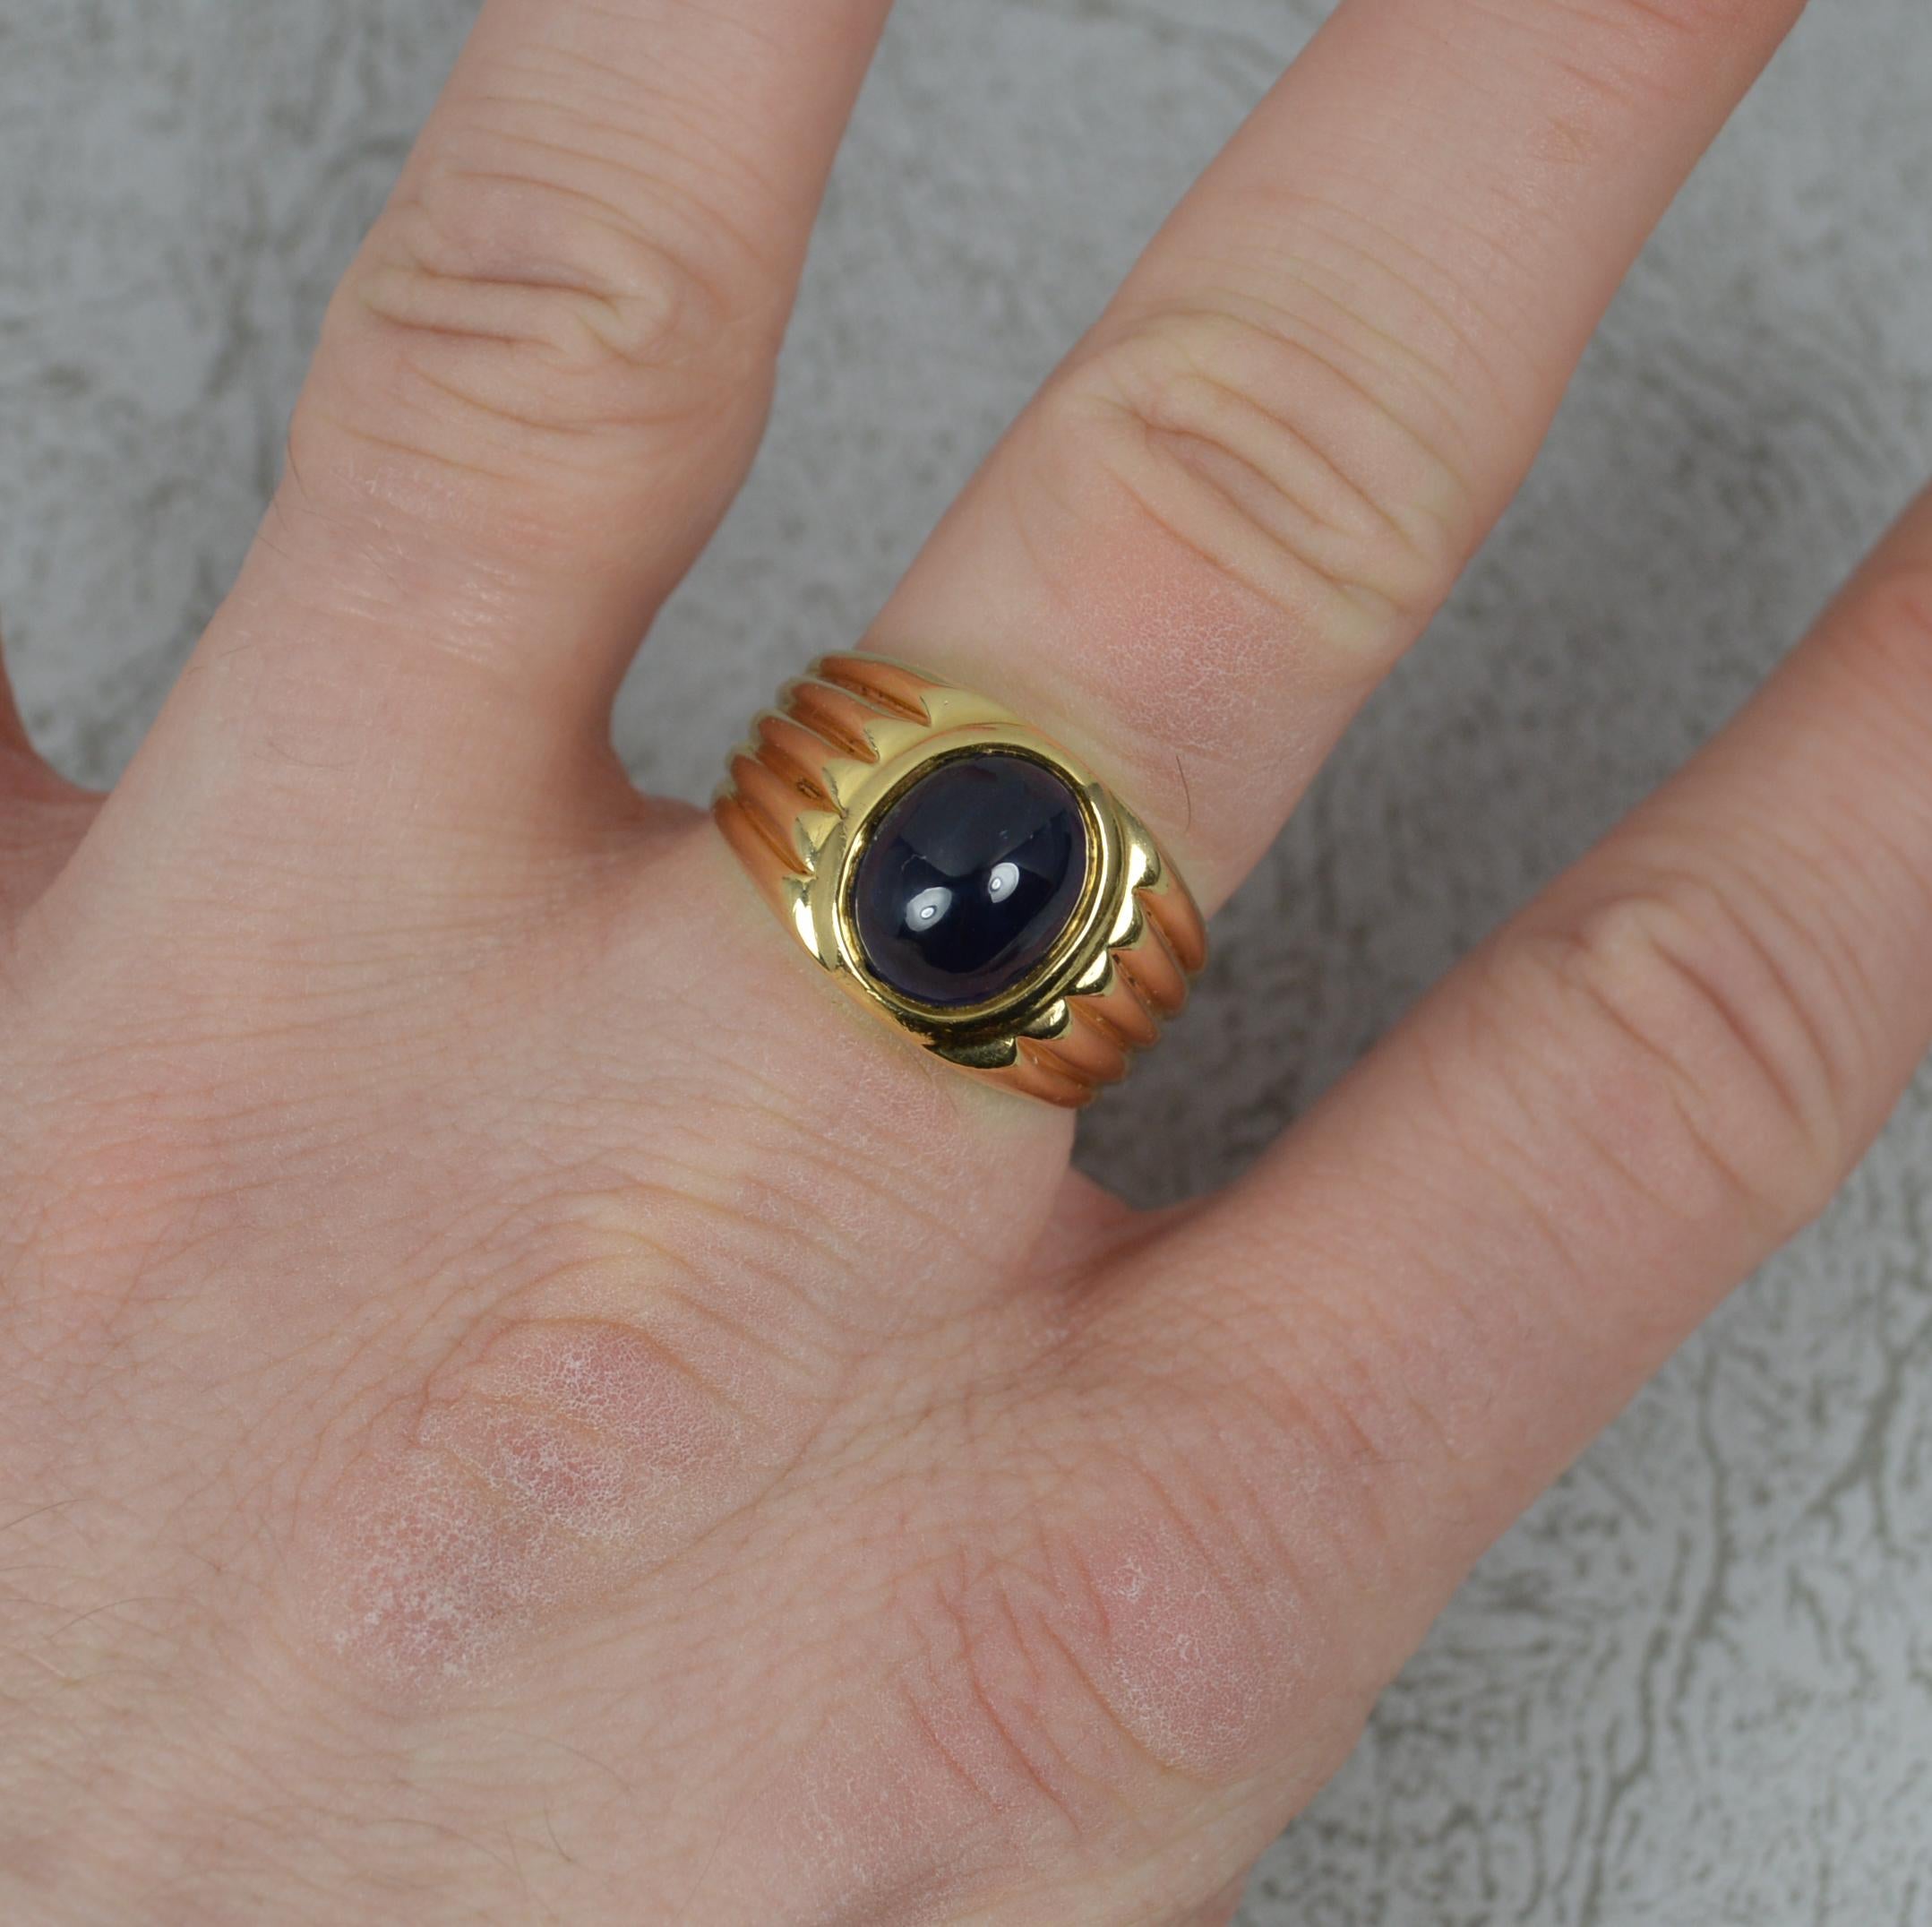 A very striking vintage solitaire statement ring.
Solid 18 carat yellow gold example. Heavy and chunky. 
8mm x 10mm x 7mm oval shaped blue sapphire cabochon.

CONDITION ; Very good. Well set, clean stones. Issue free. Solid shank. Please view